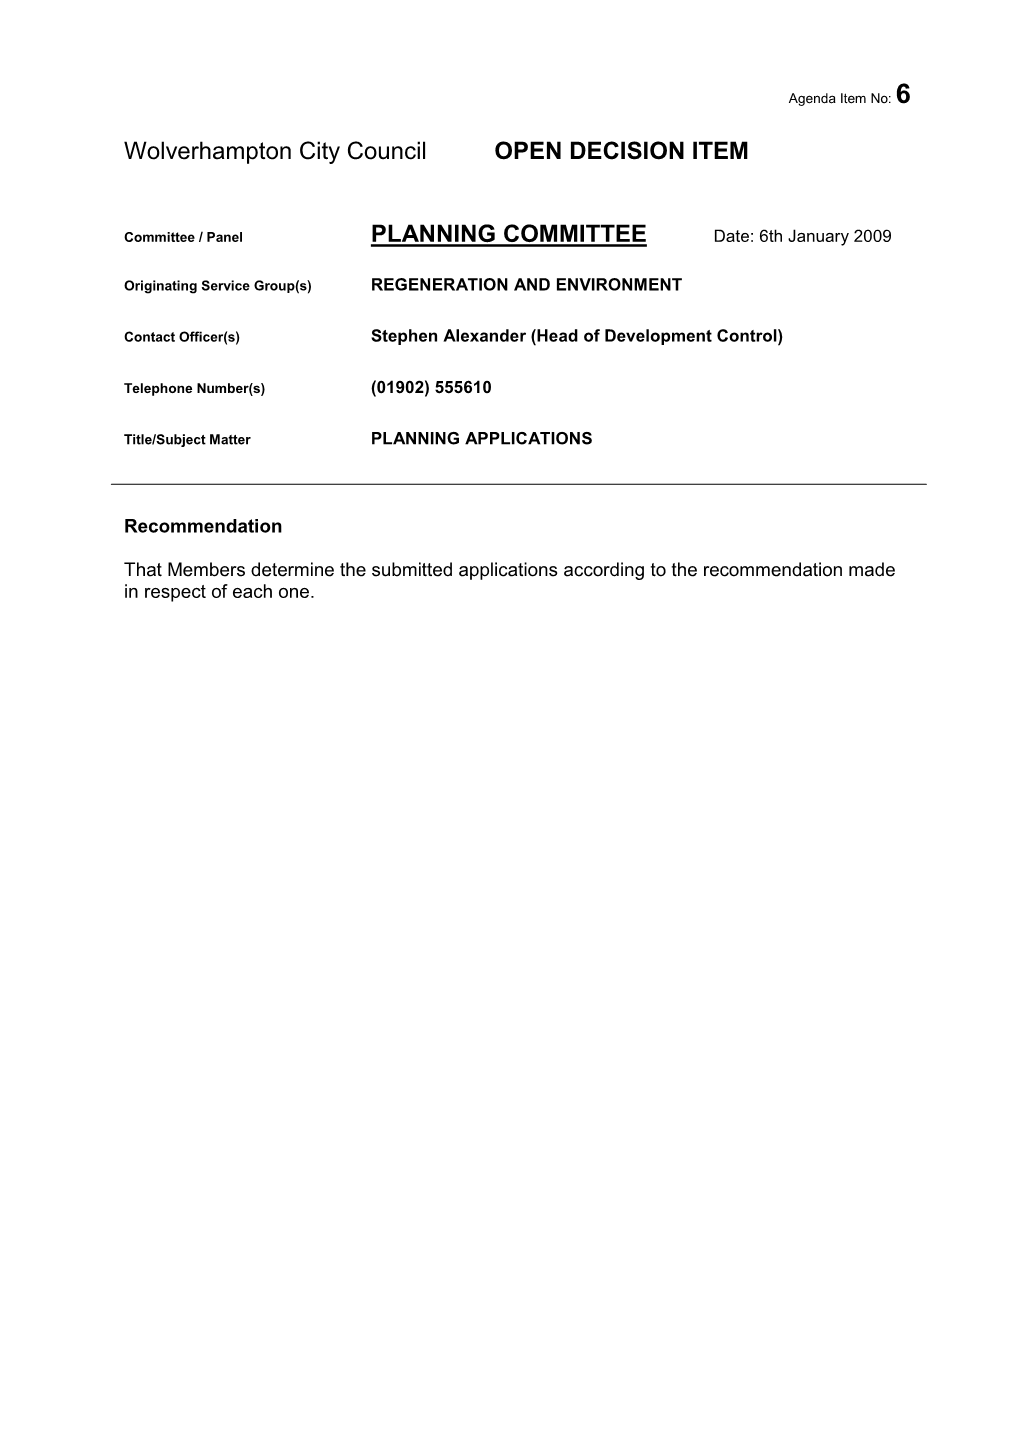 Wolverhampton City Council OPEN DECISION ITEM PLANNING COMMITTEE